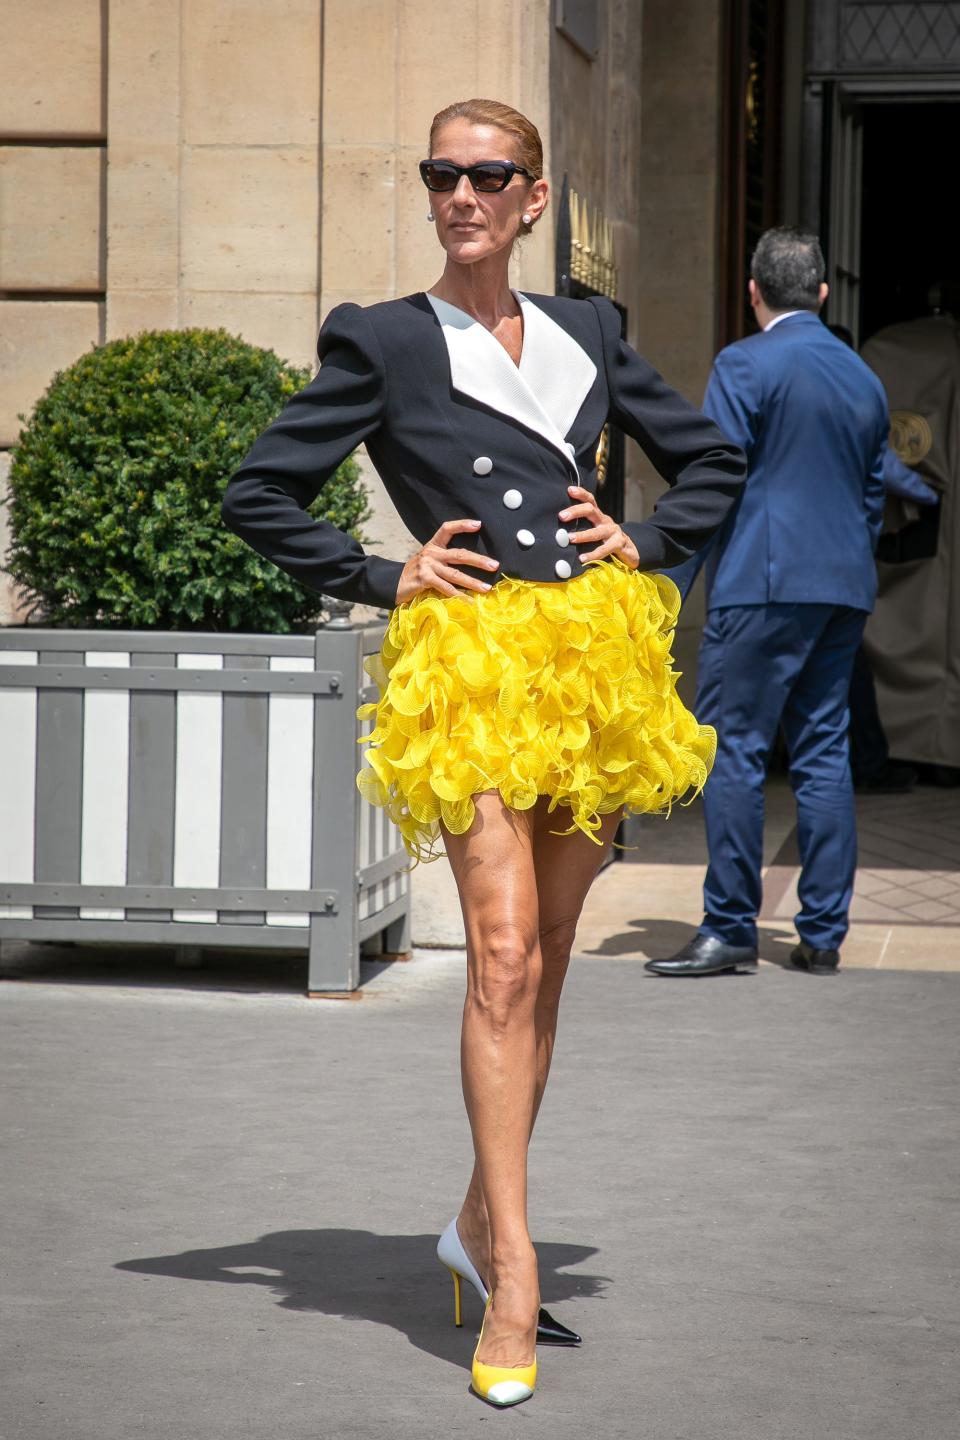 Celine in a black and white tuxedo-lke jacket, a feathery yellow miniskirt, sunglasses, and heels.